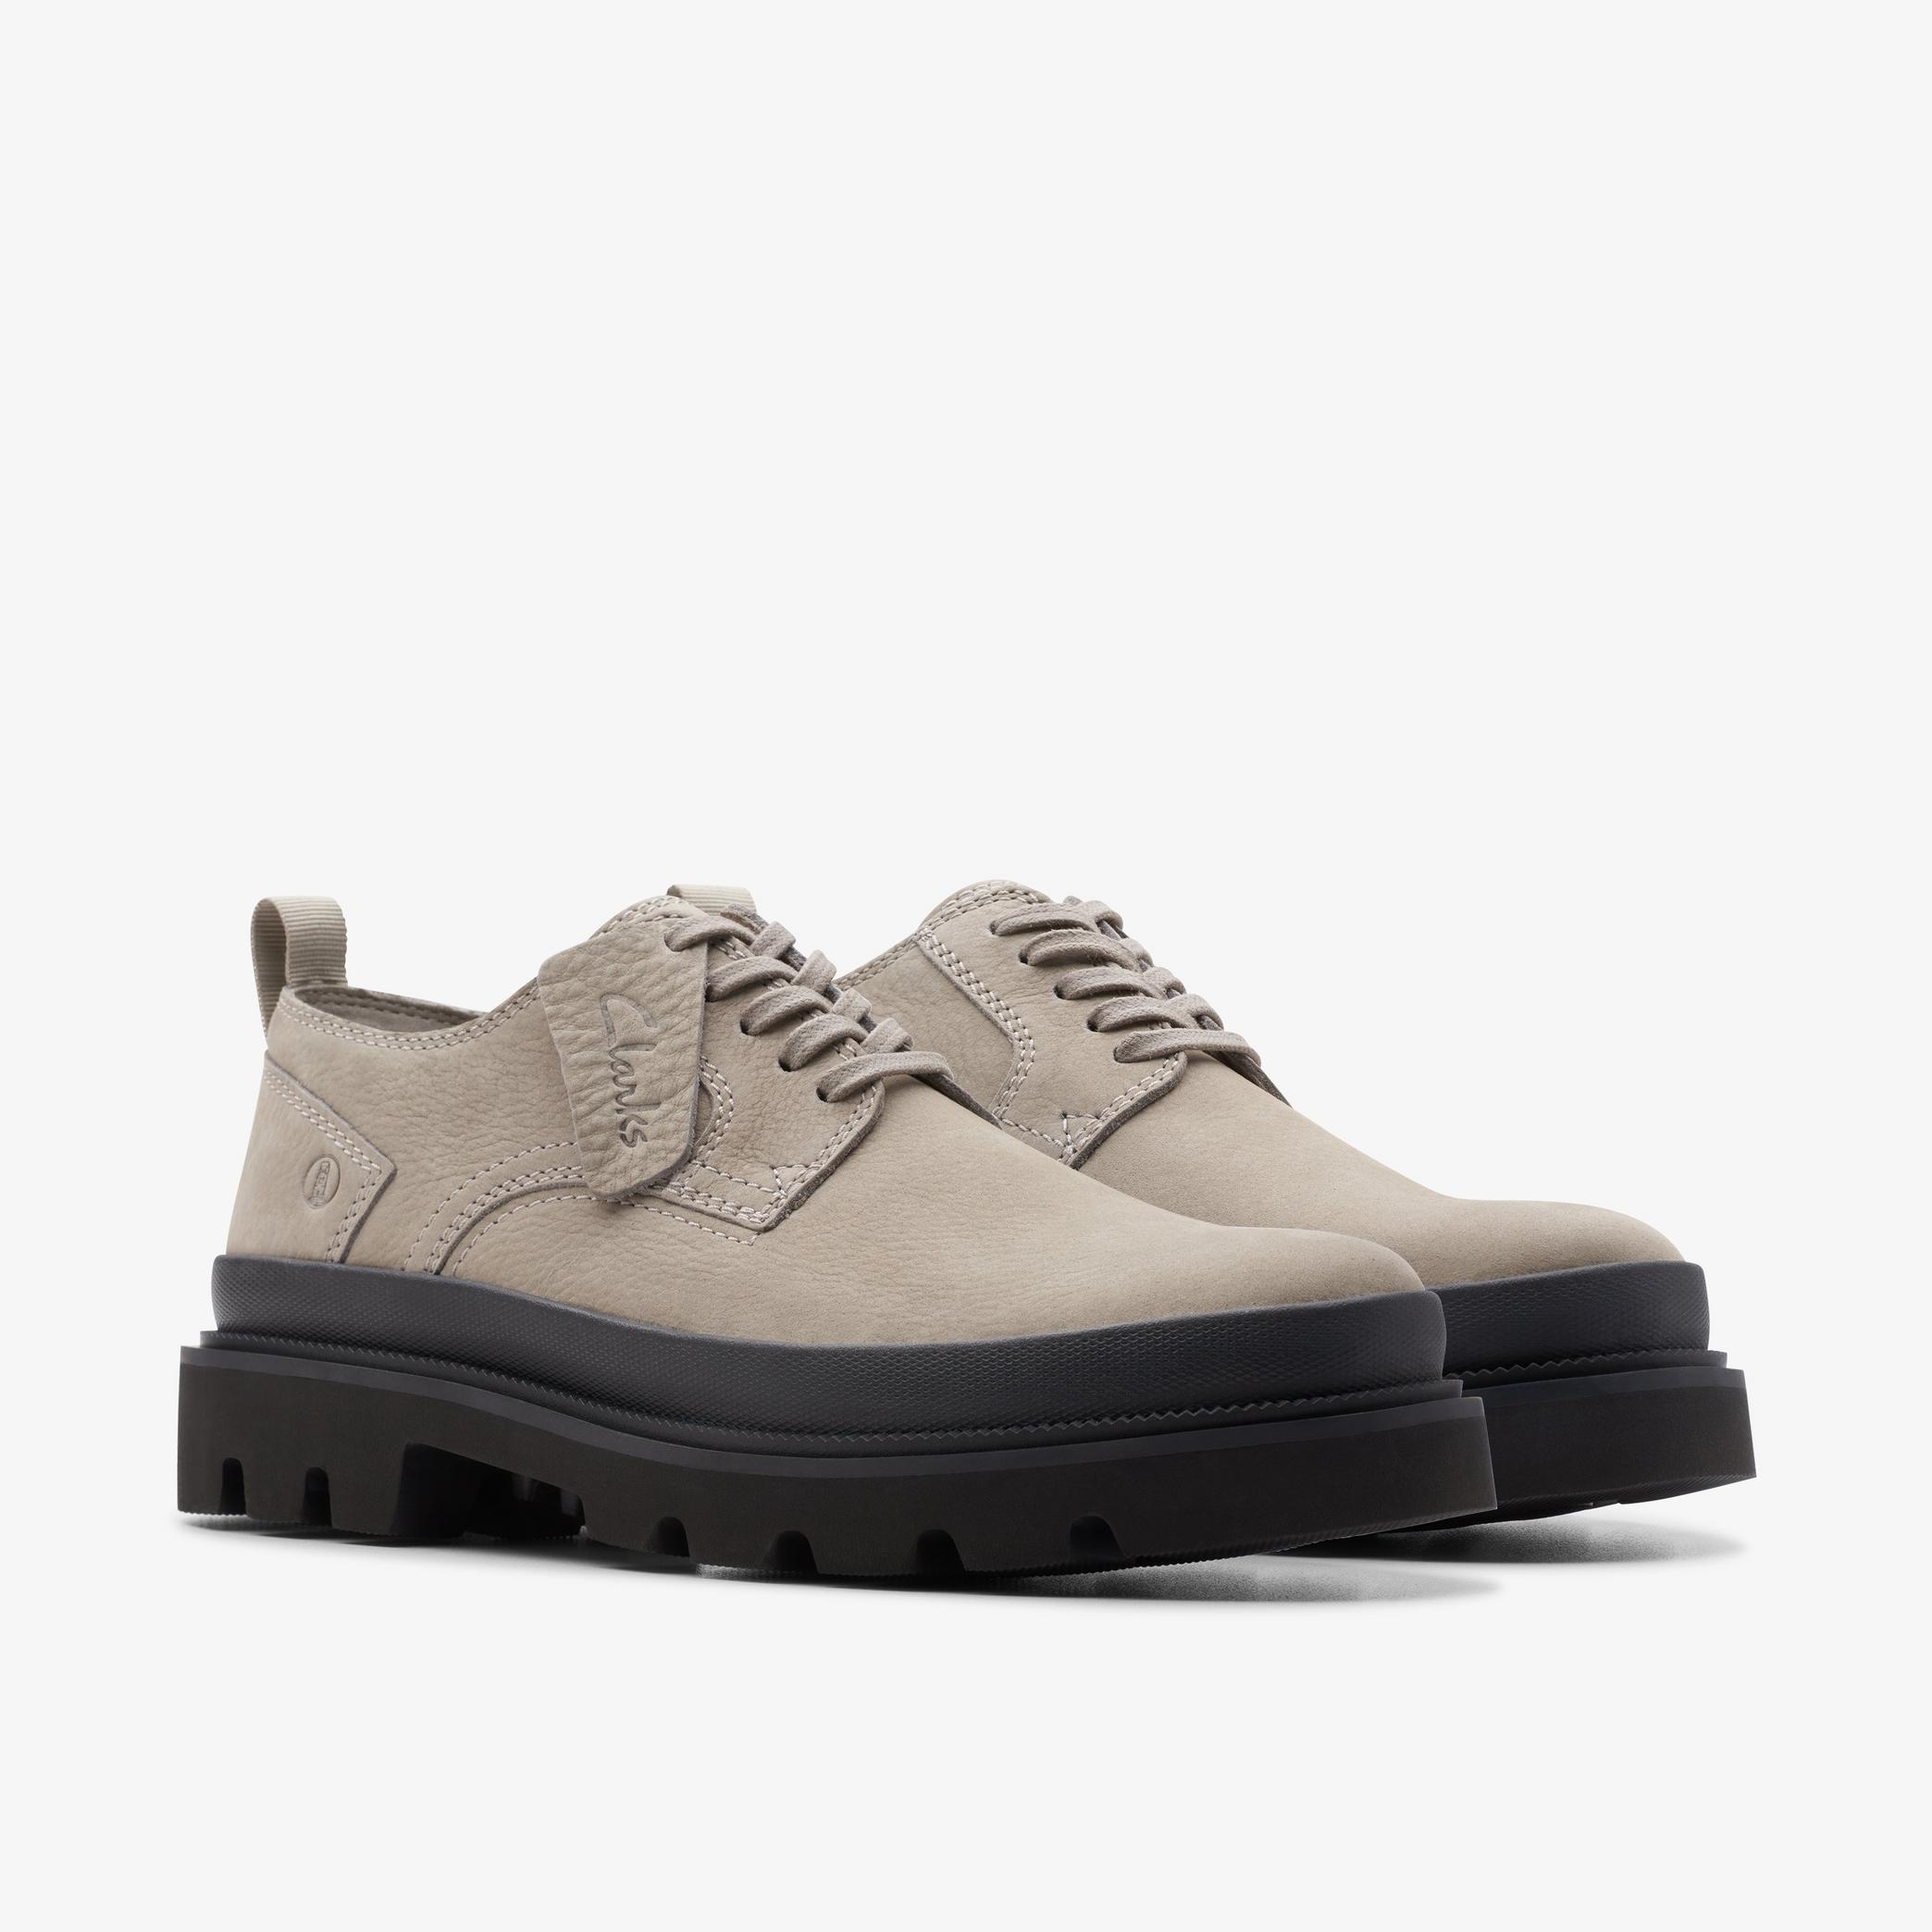 Badell Lace Grey Nubuck Oxford Shoes, view 4 of 6